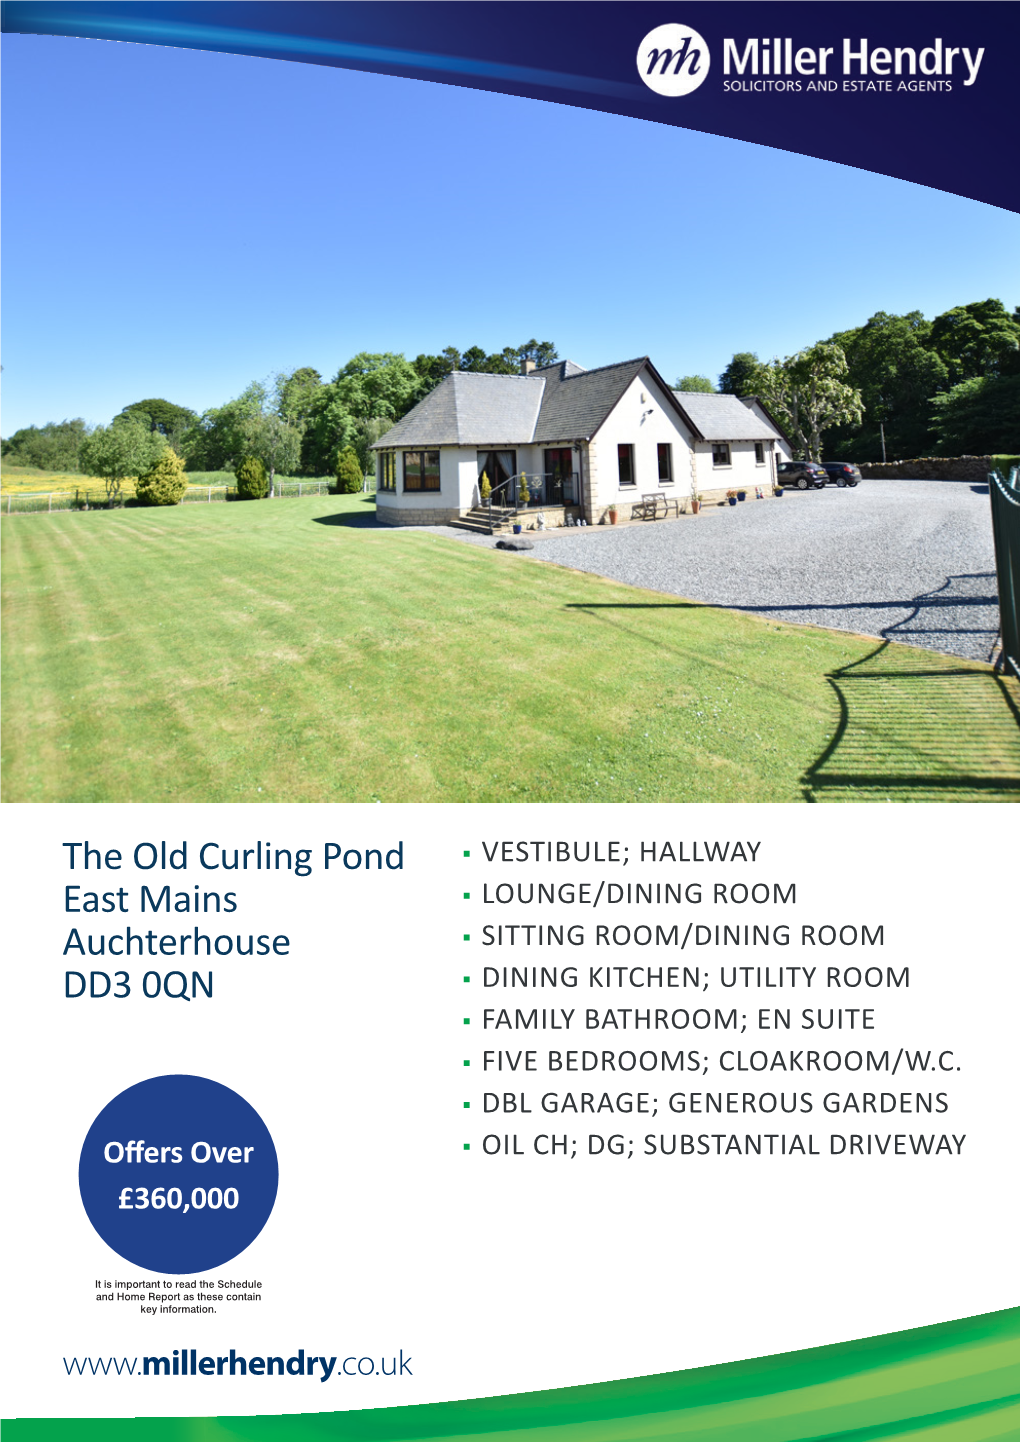 The Old Curling Pond East Mains Auchterhouse DD3